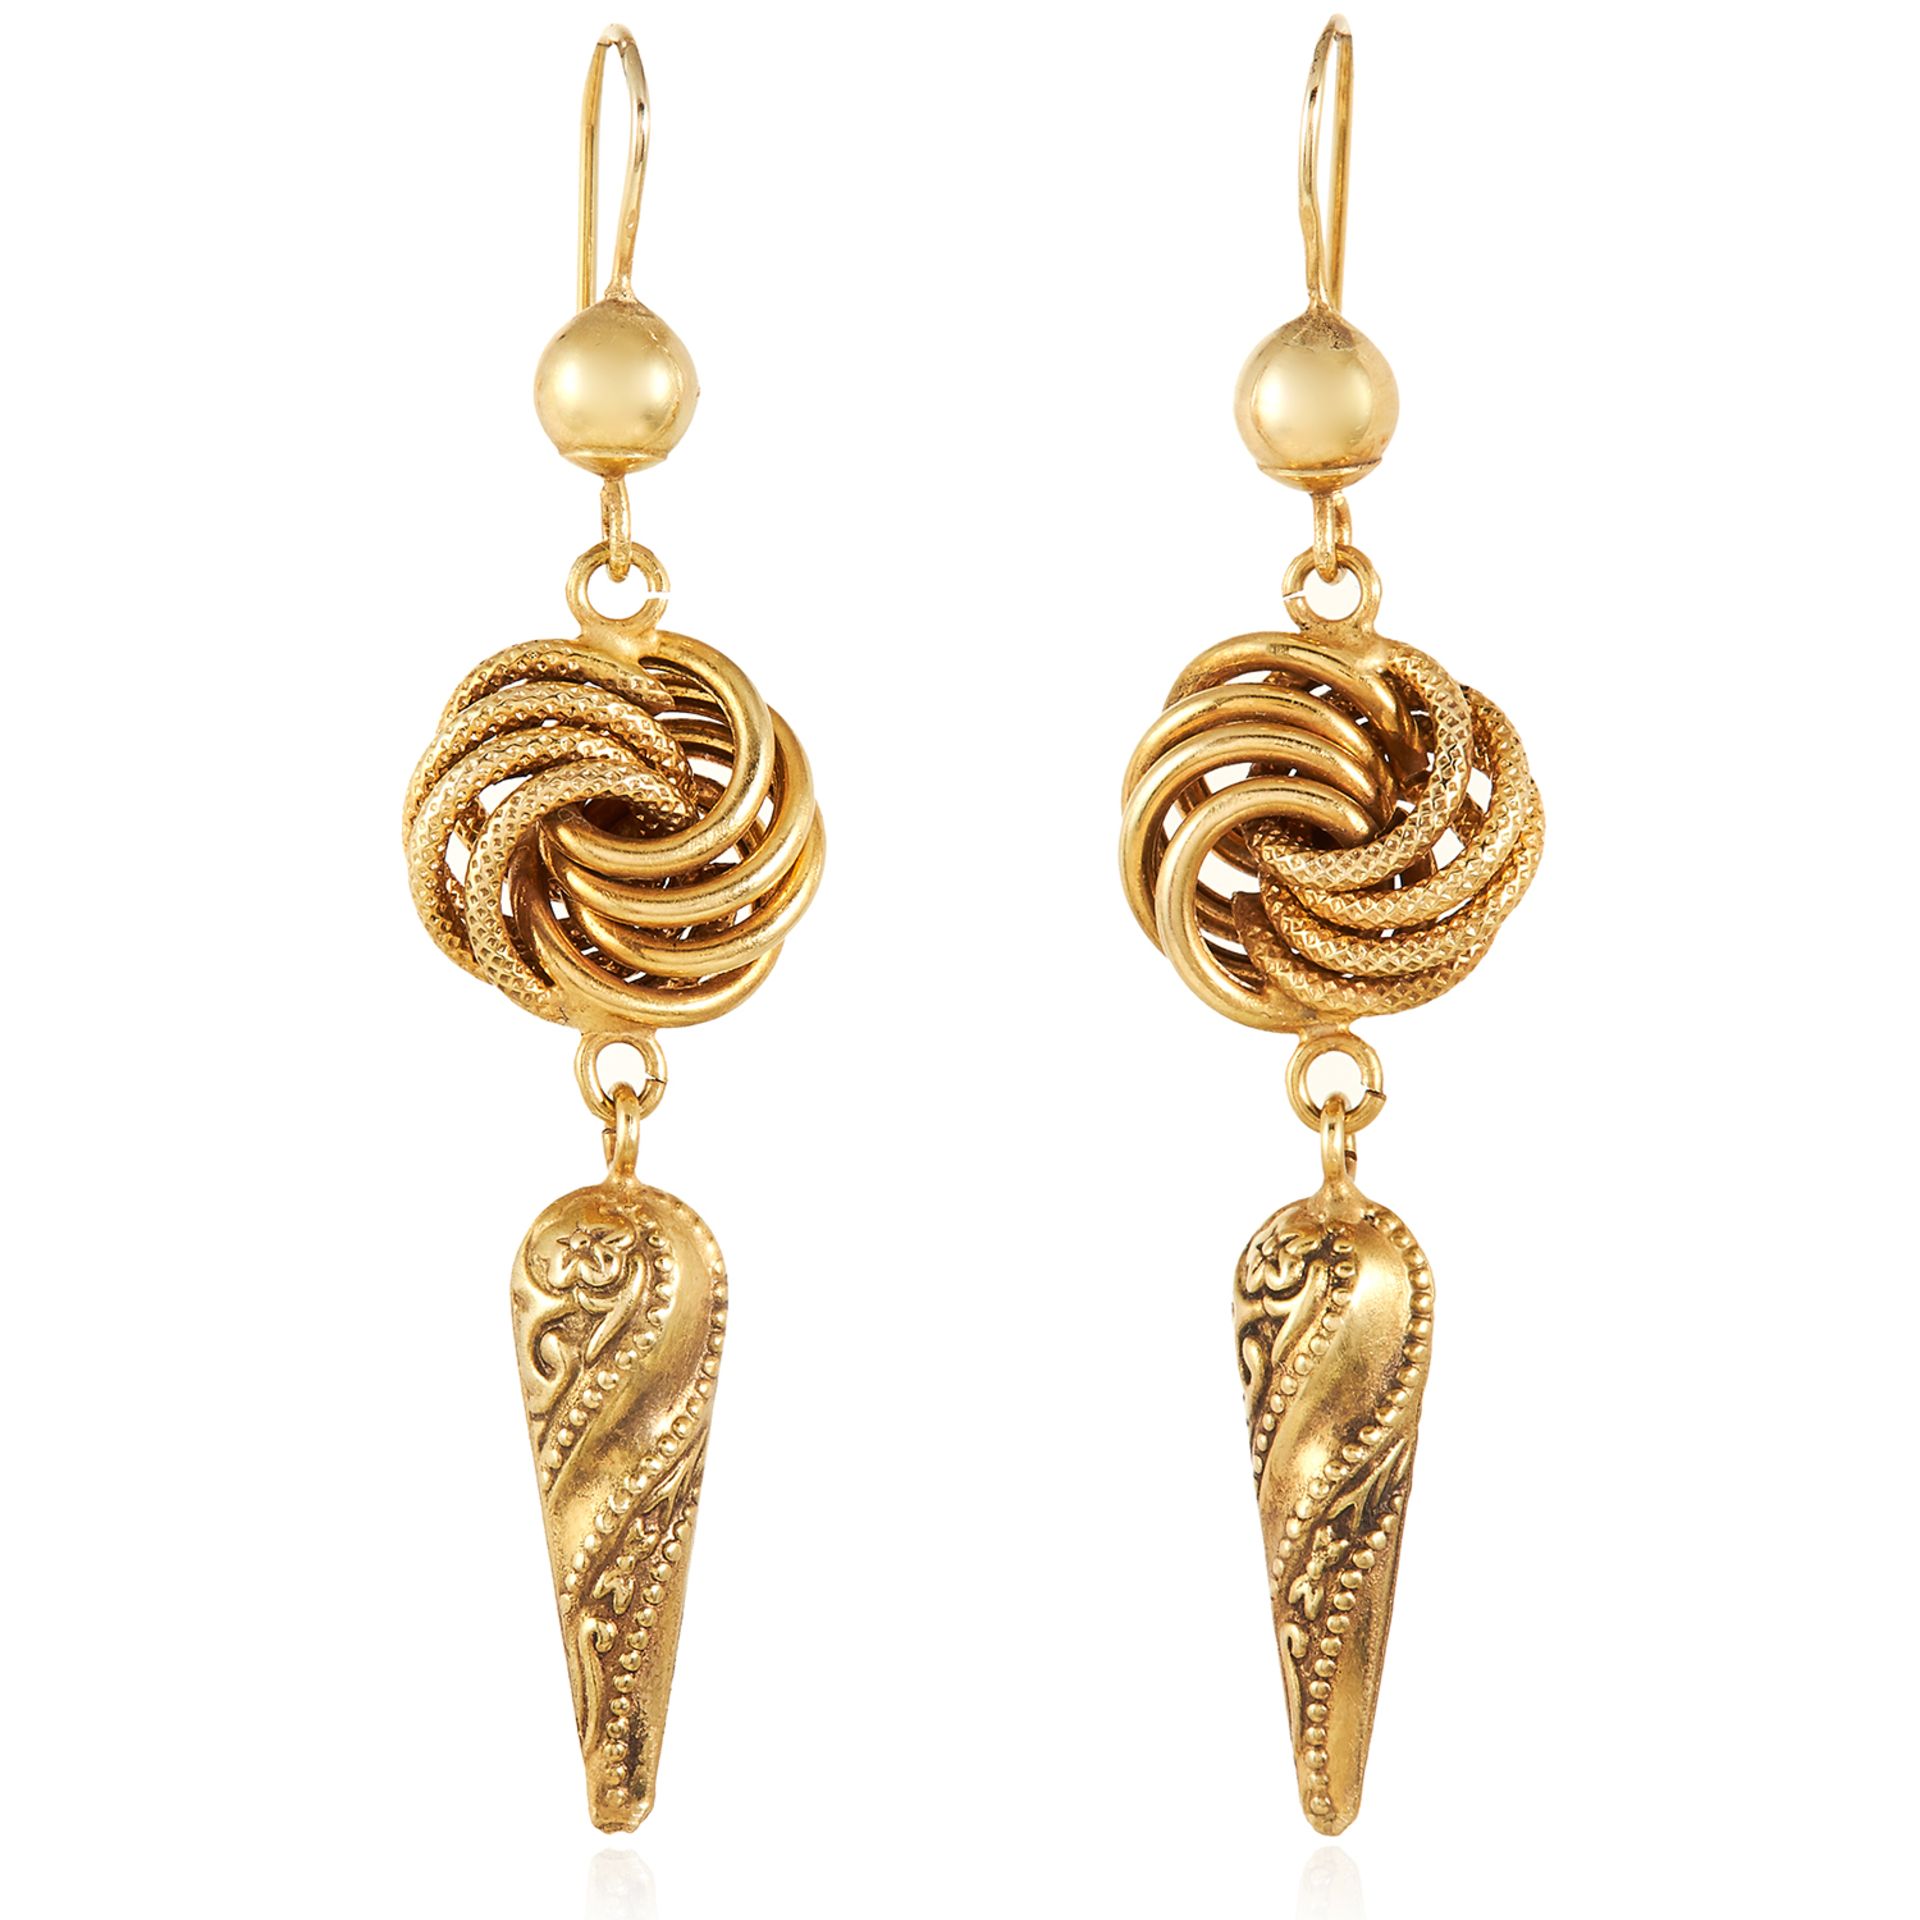 A PAIR OF ANTIQUE ARTICULATED LOVERS KNOT EARRINGS, 19TH CENTURY in yellow gold, each designed